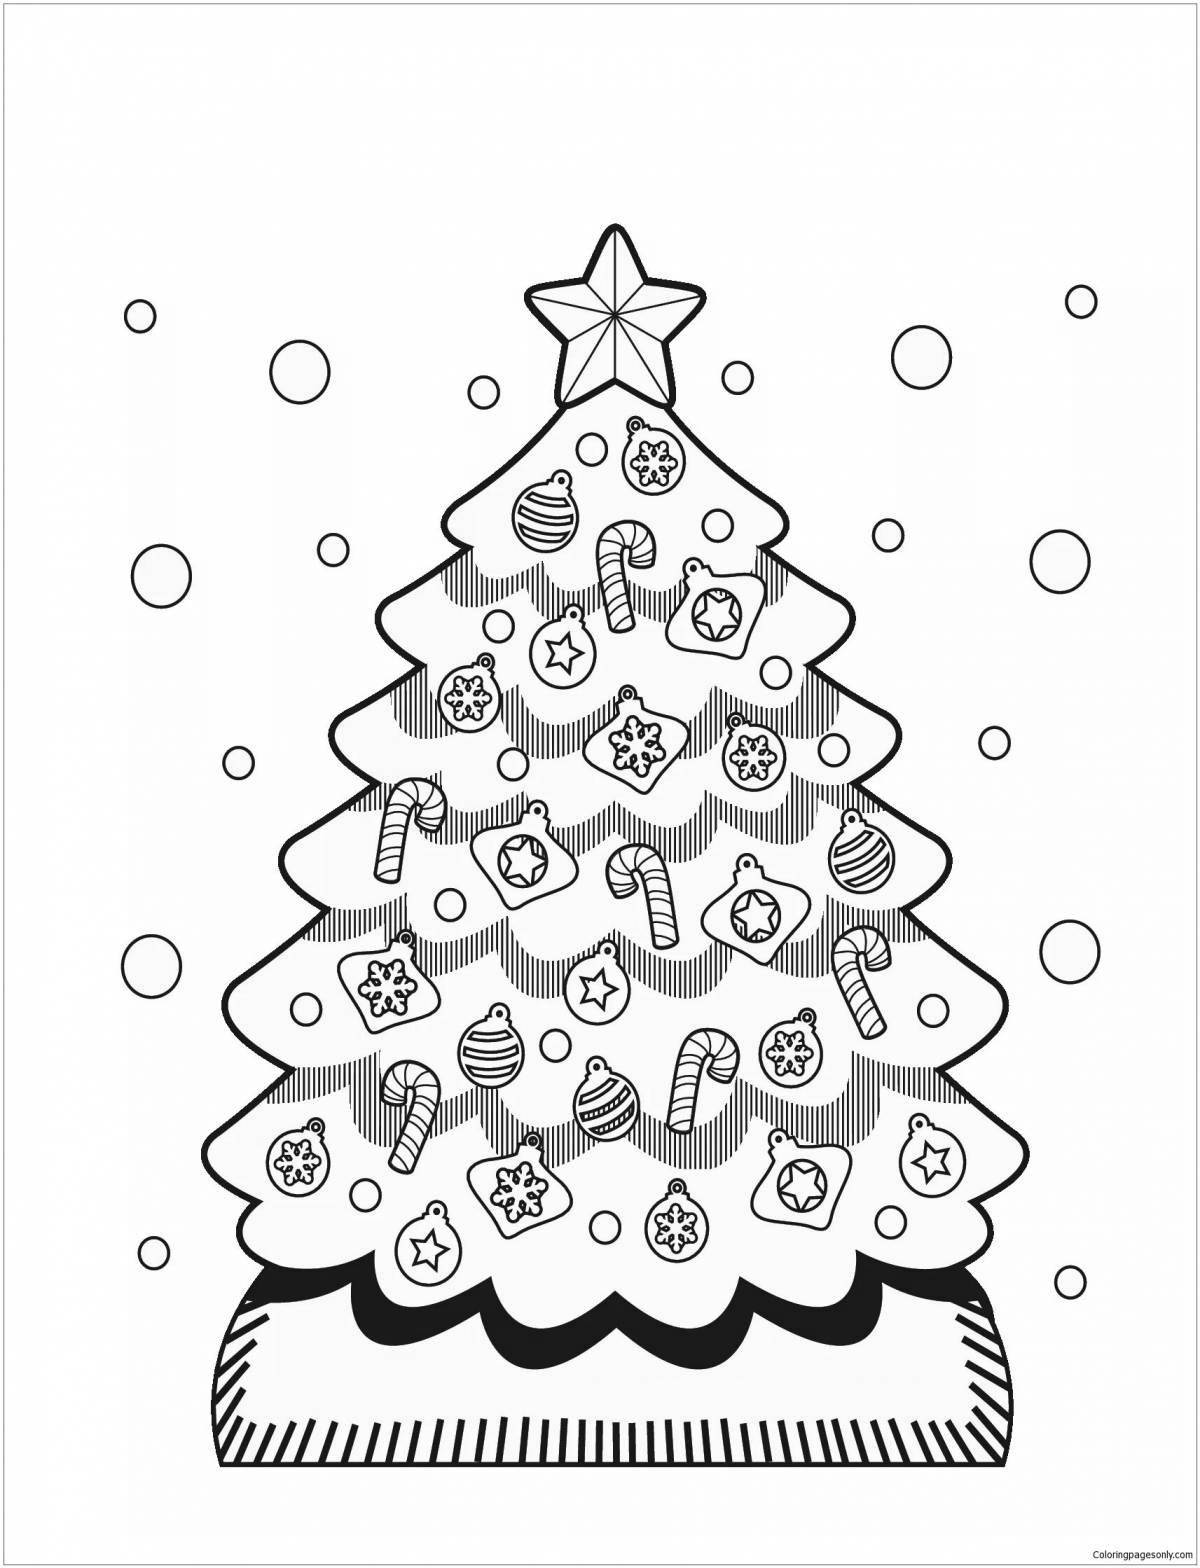 Joyful drawing of a Christmas tree for children